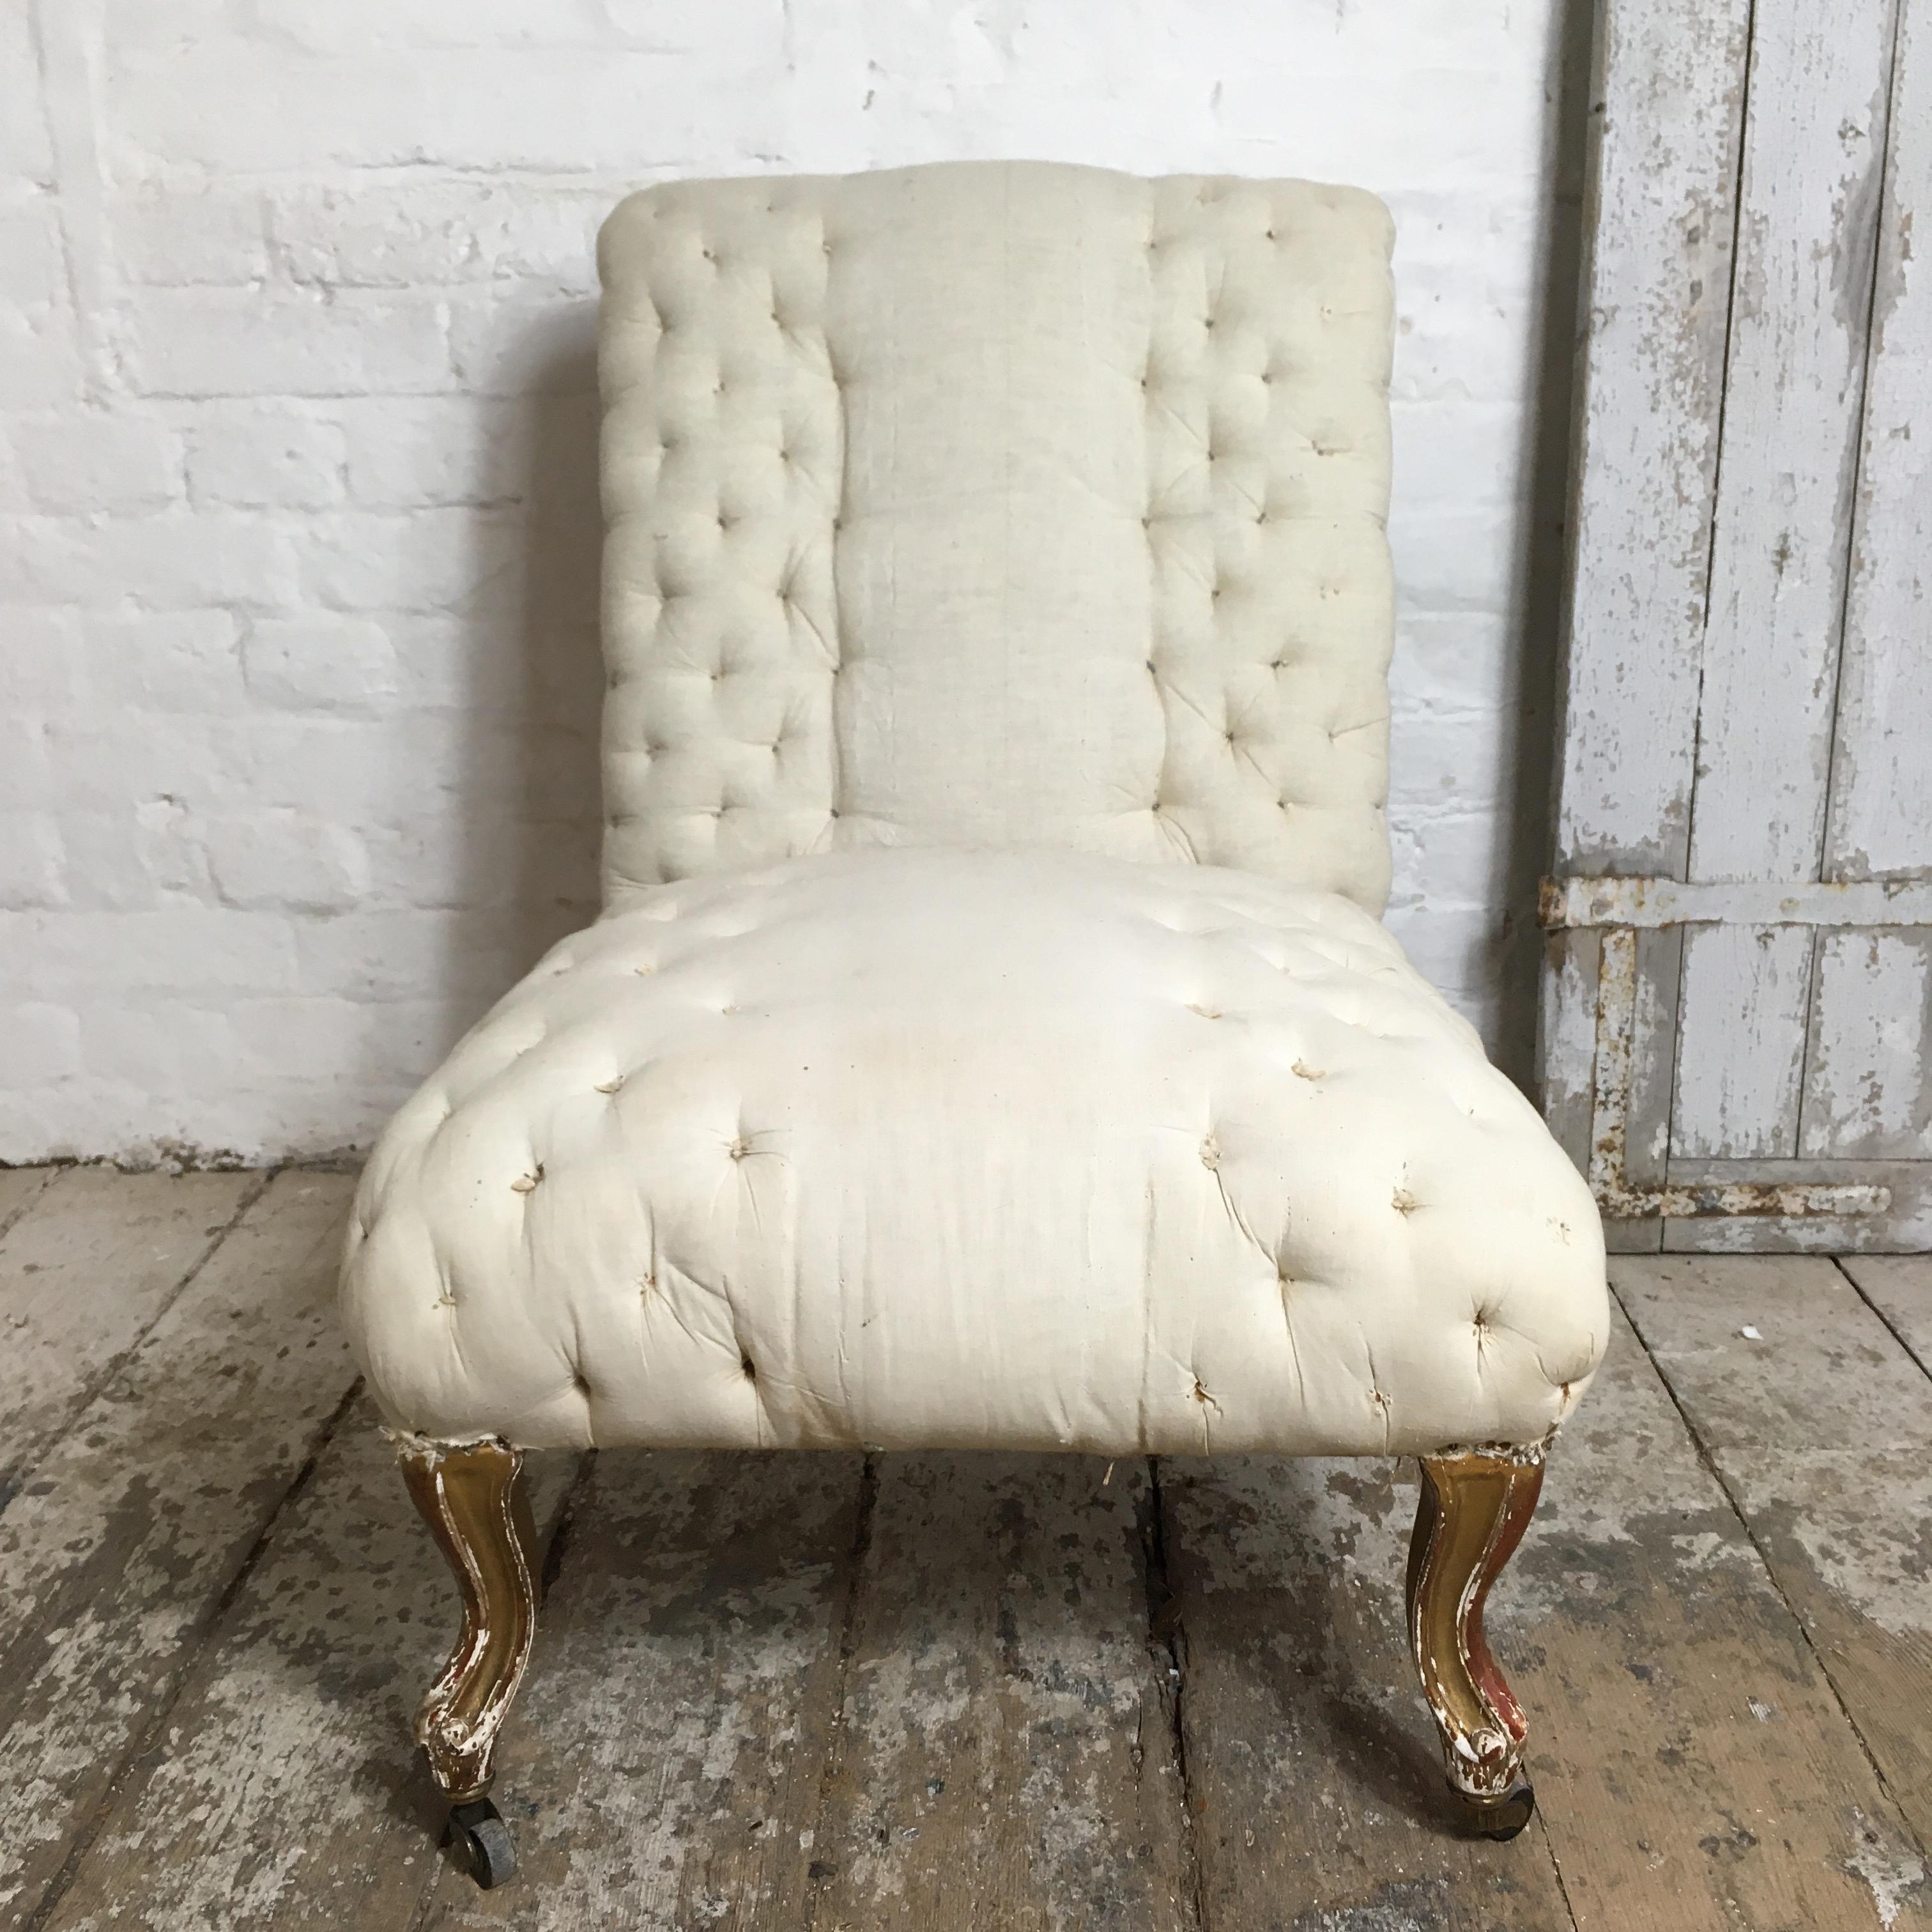 French Napoleon III stripped back chair.
Rare early 19th century bedroom / occasional chair.
Giltwood cabriolet legs with original castors.
The chair is stripped back ready for upholstery or could be left as is, due to the calico being so clean and